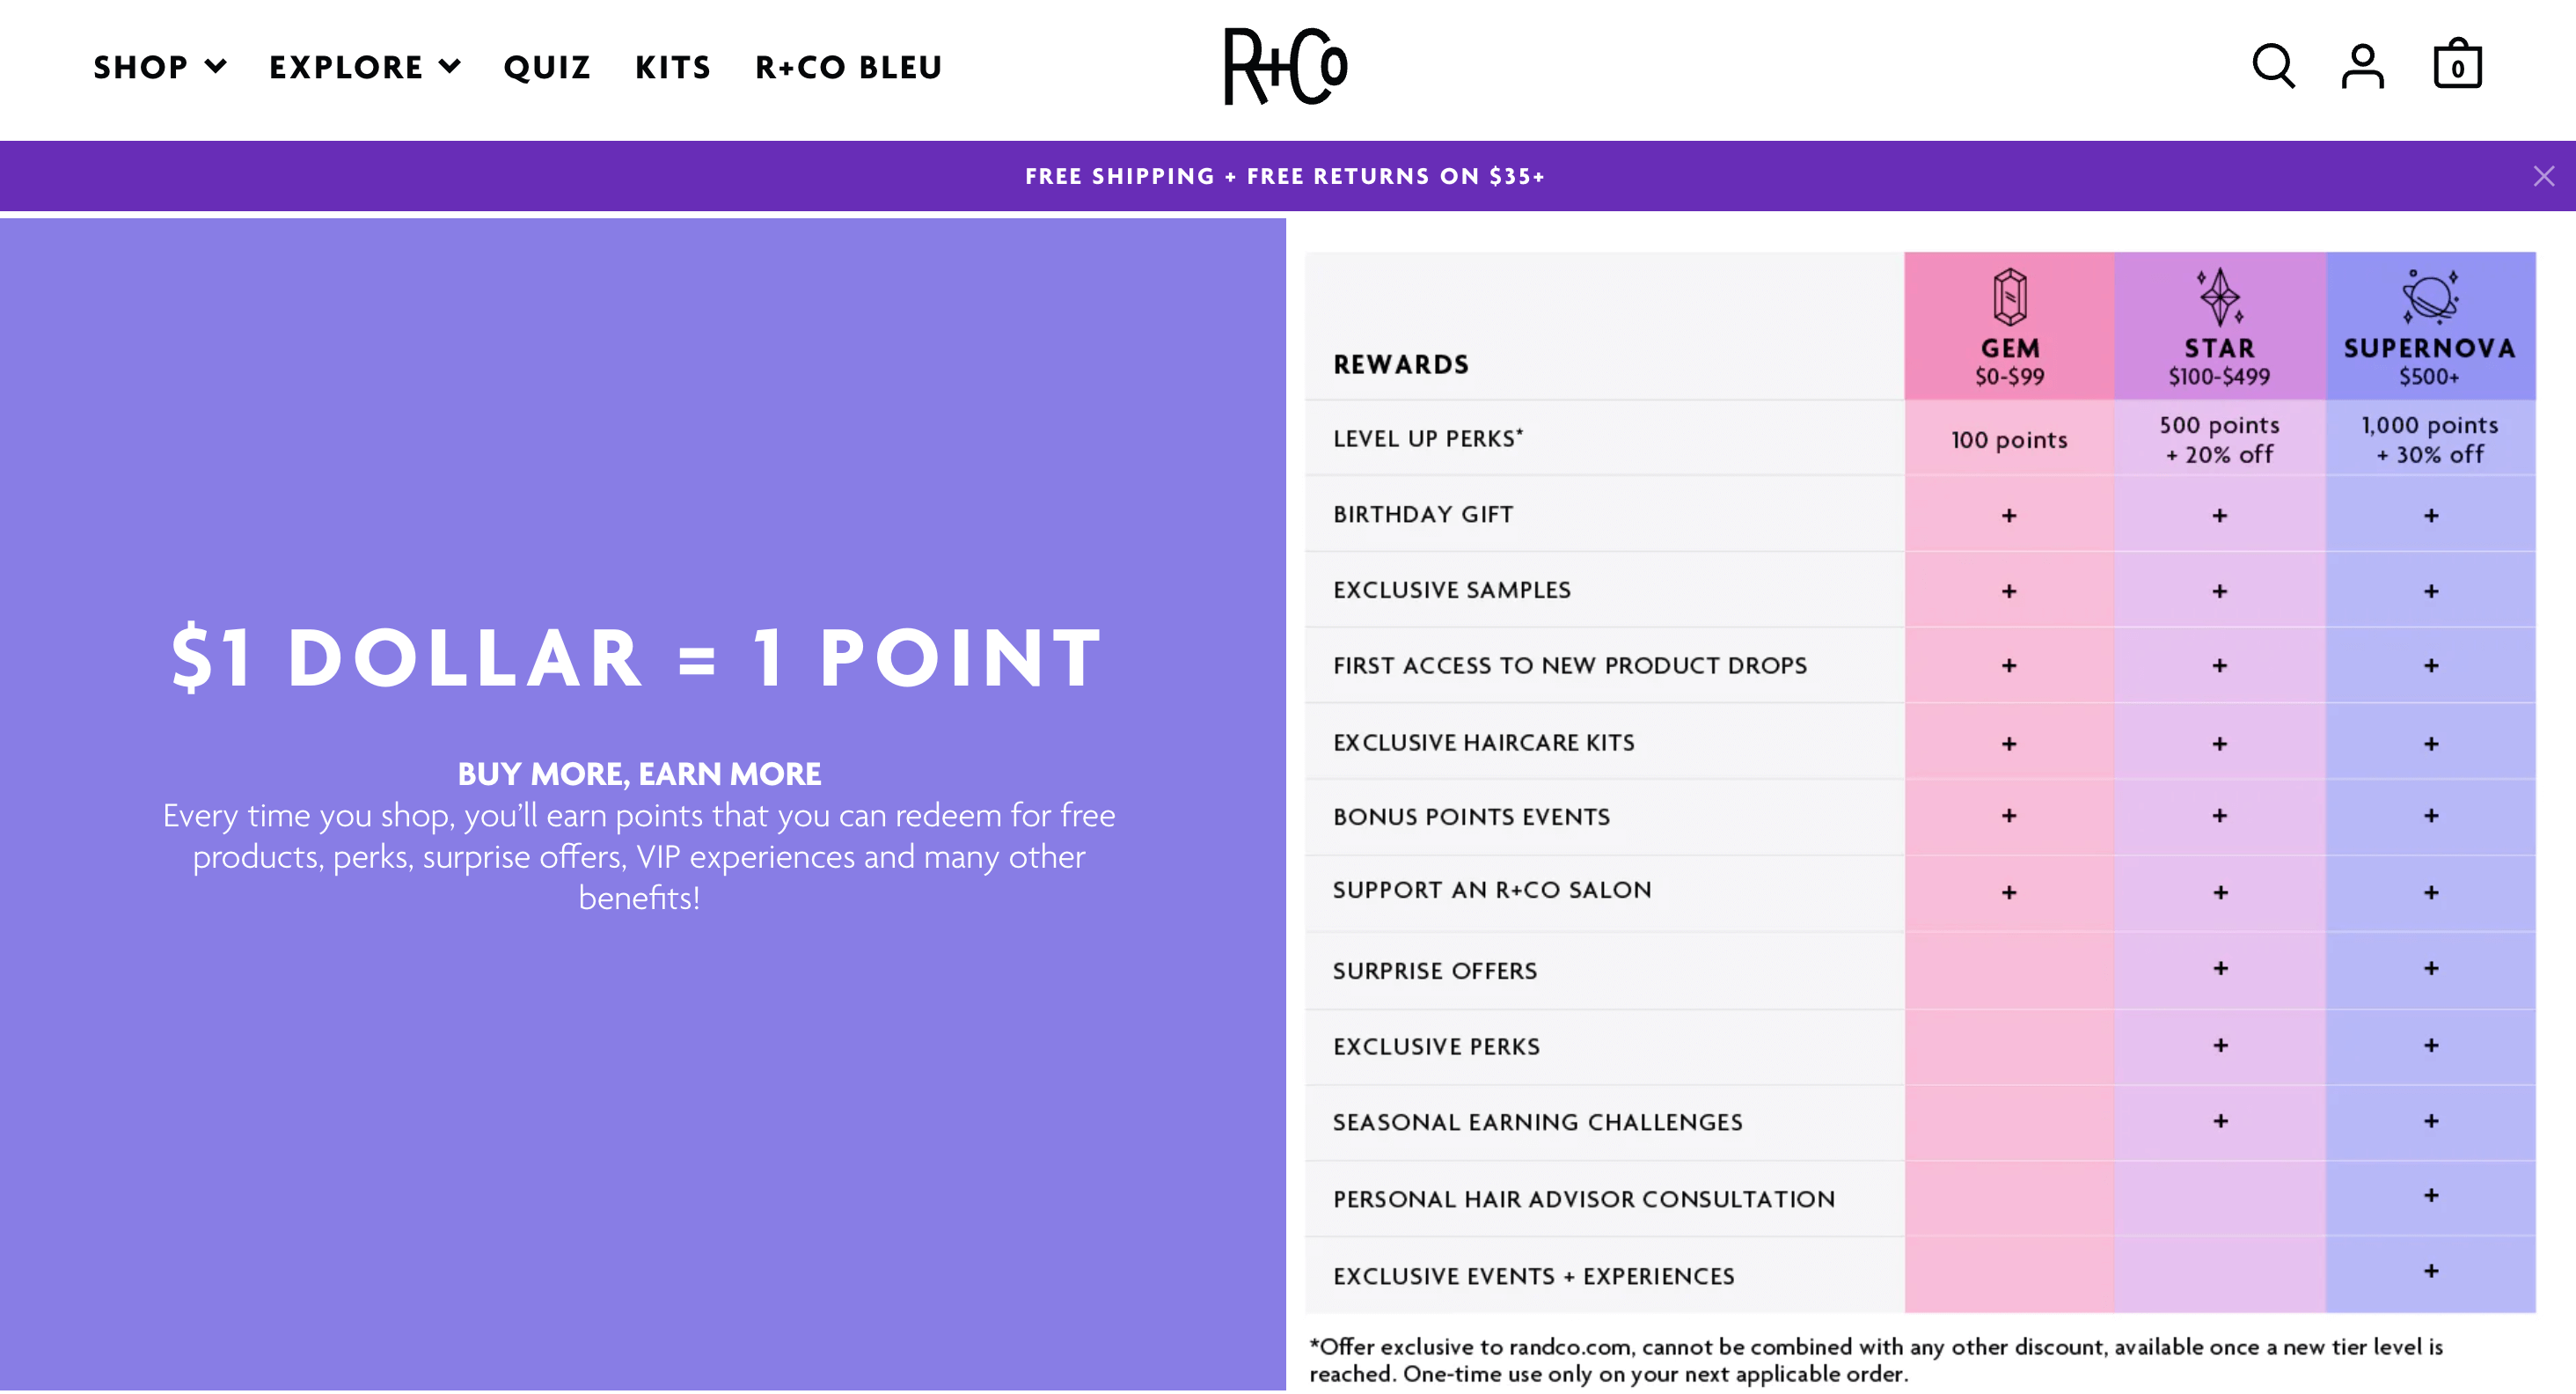 A chart displaying the rewards available to each tier in R+Co’s rewards programs: Gem, Star, and Supernova. 